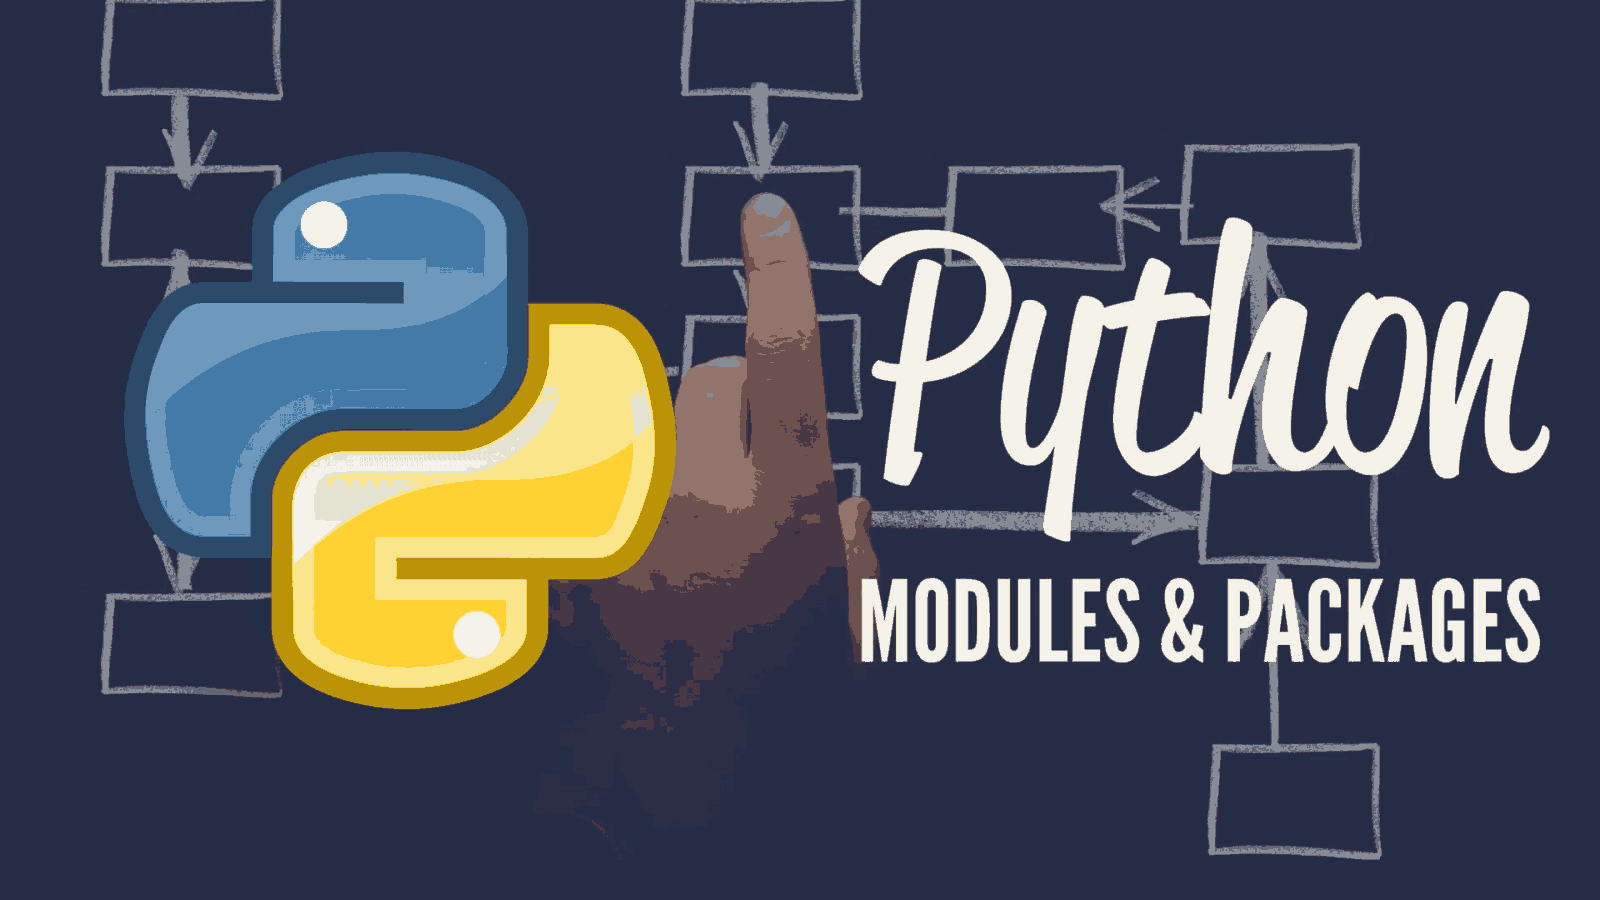 What are Python Modules